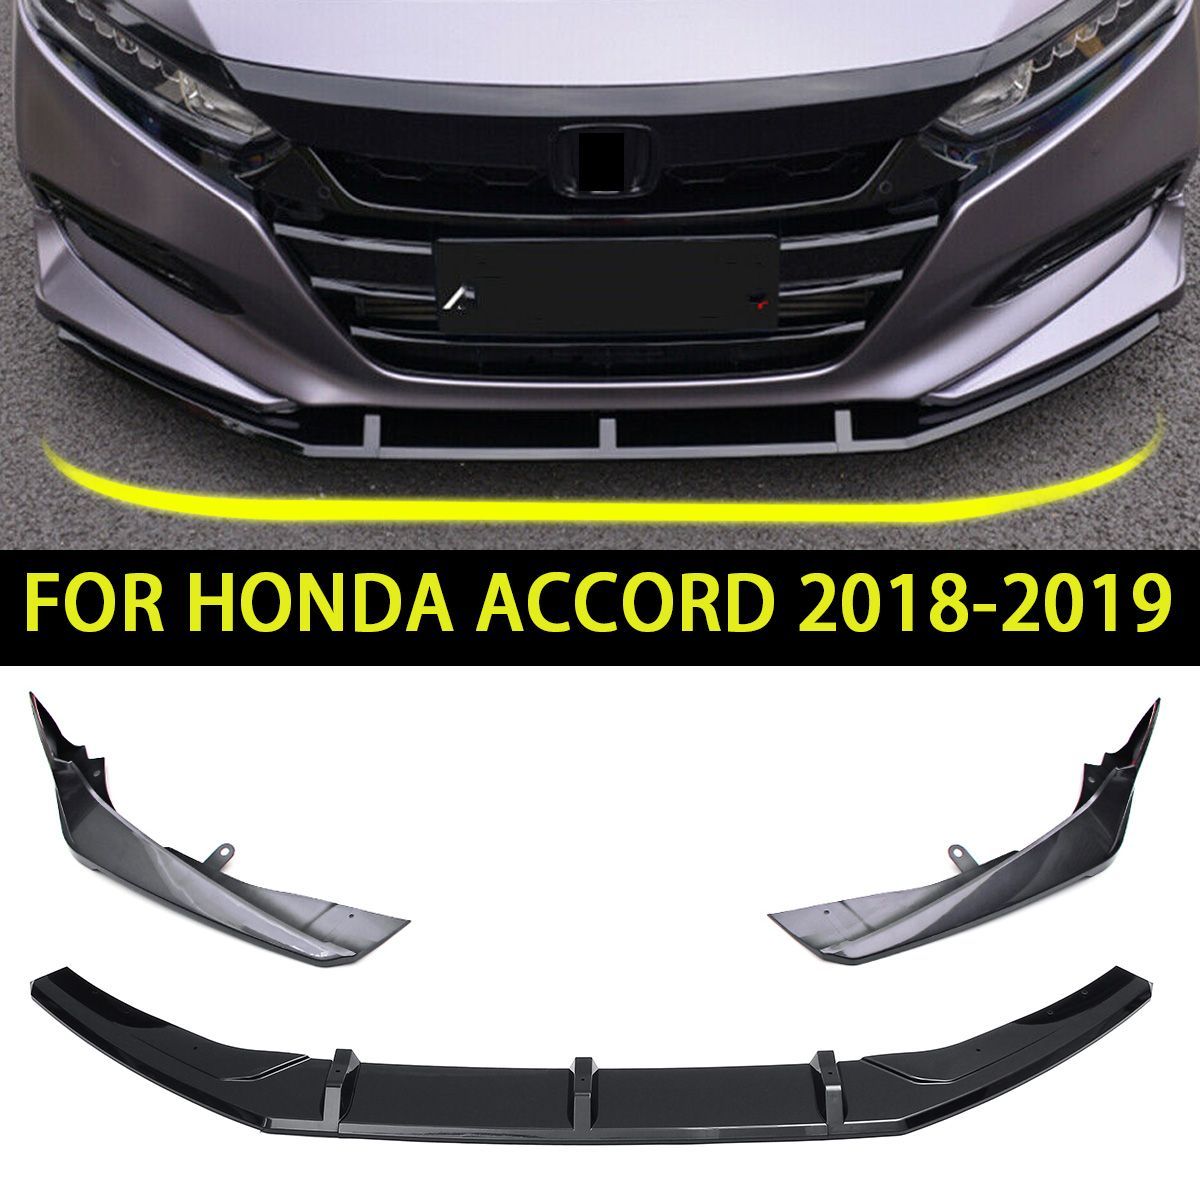 5PCS-ABS-Front-Bumper-Lip-Protector-Surround-Molding-Cover-Trim-For-Honda-Accord-2018-2019-1493324